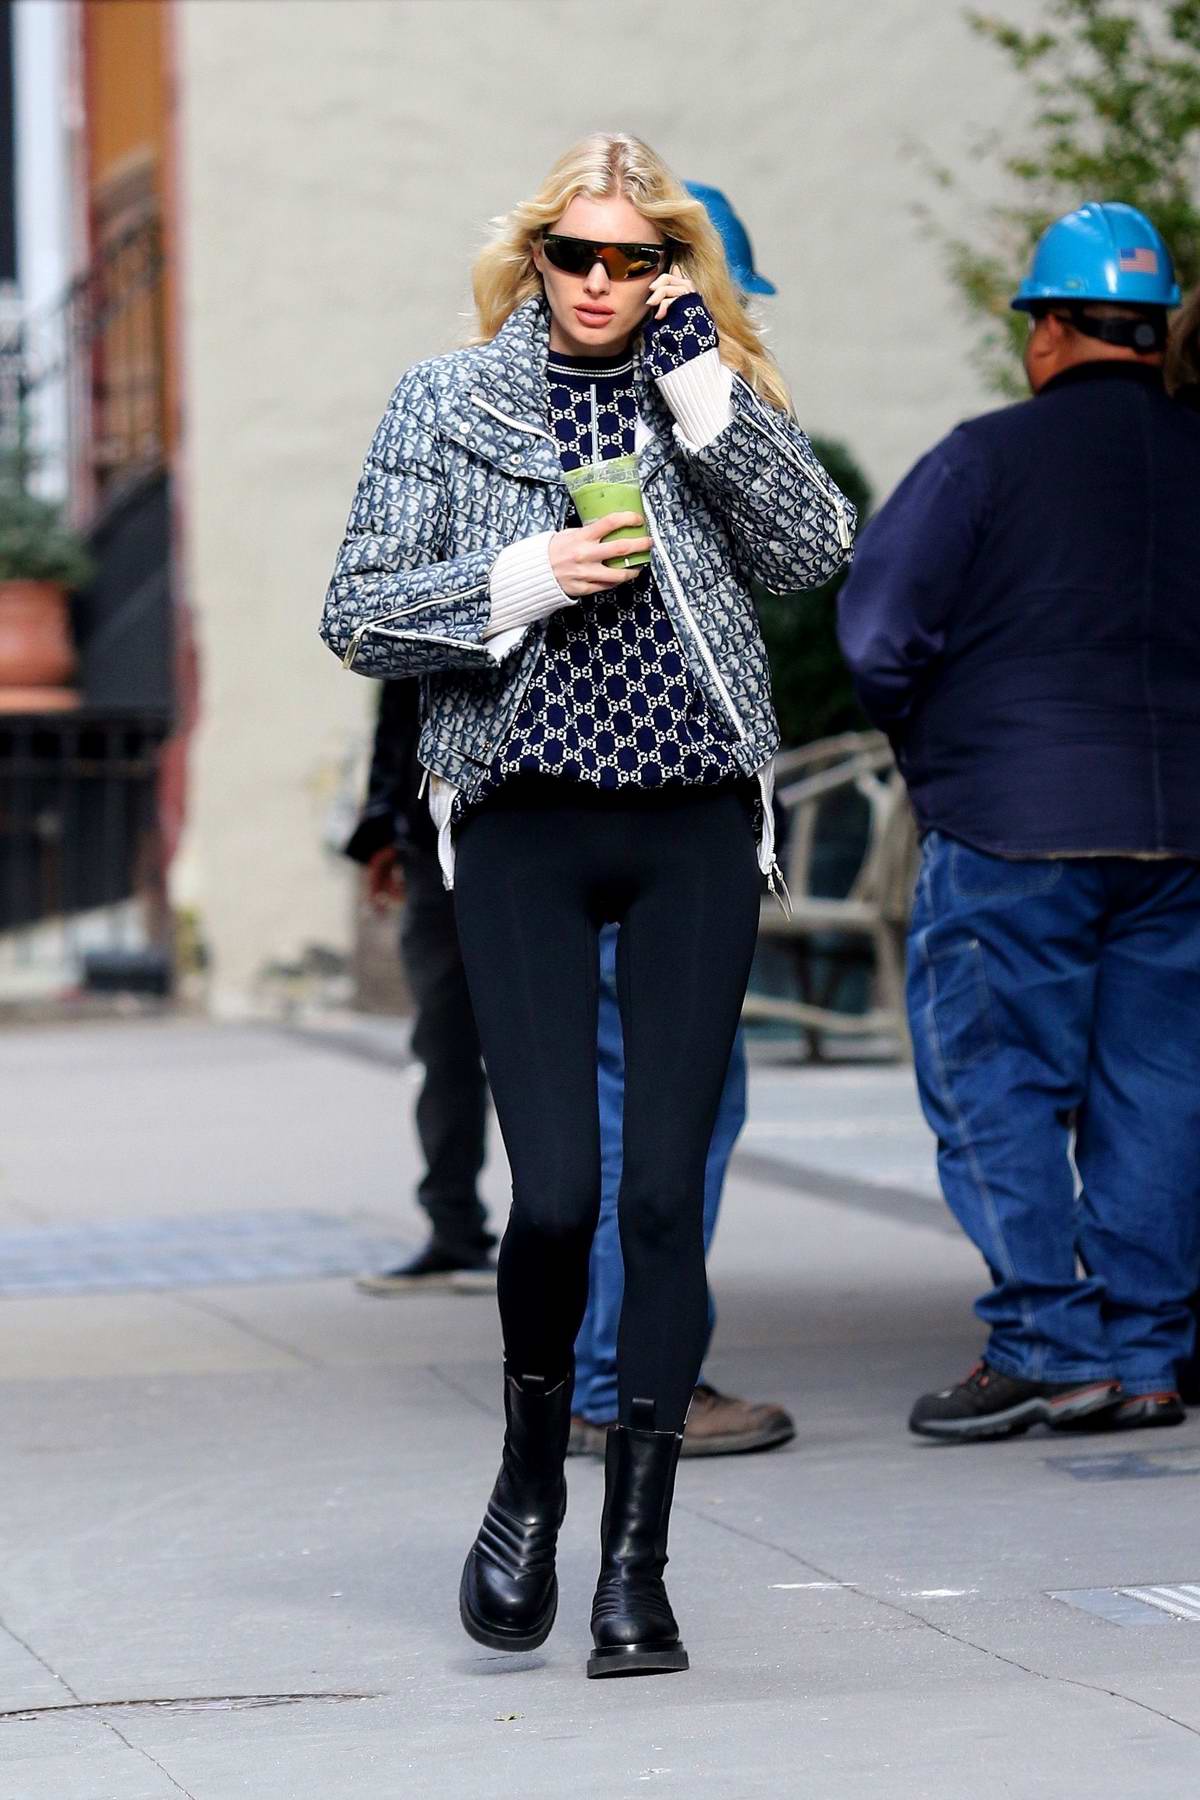 Elsa Hosk looks stylish in a Dior jacket with patterned sweater and leggings  while out for